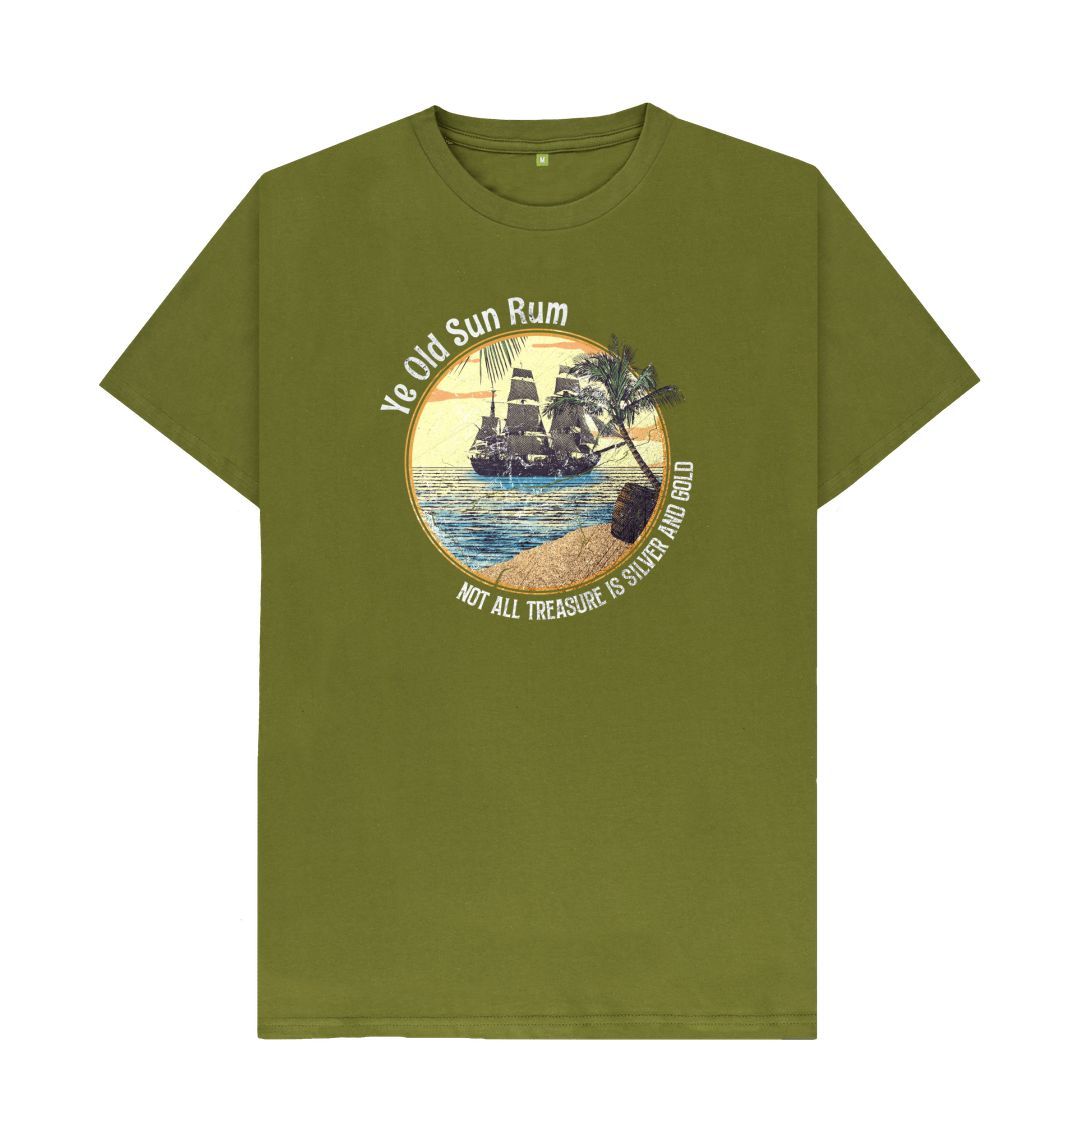 Moss Green Mens Tee - Old Sun Rum - Not all Treasure is Silver and Gold